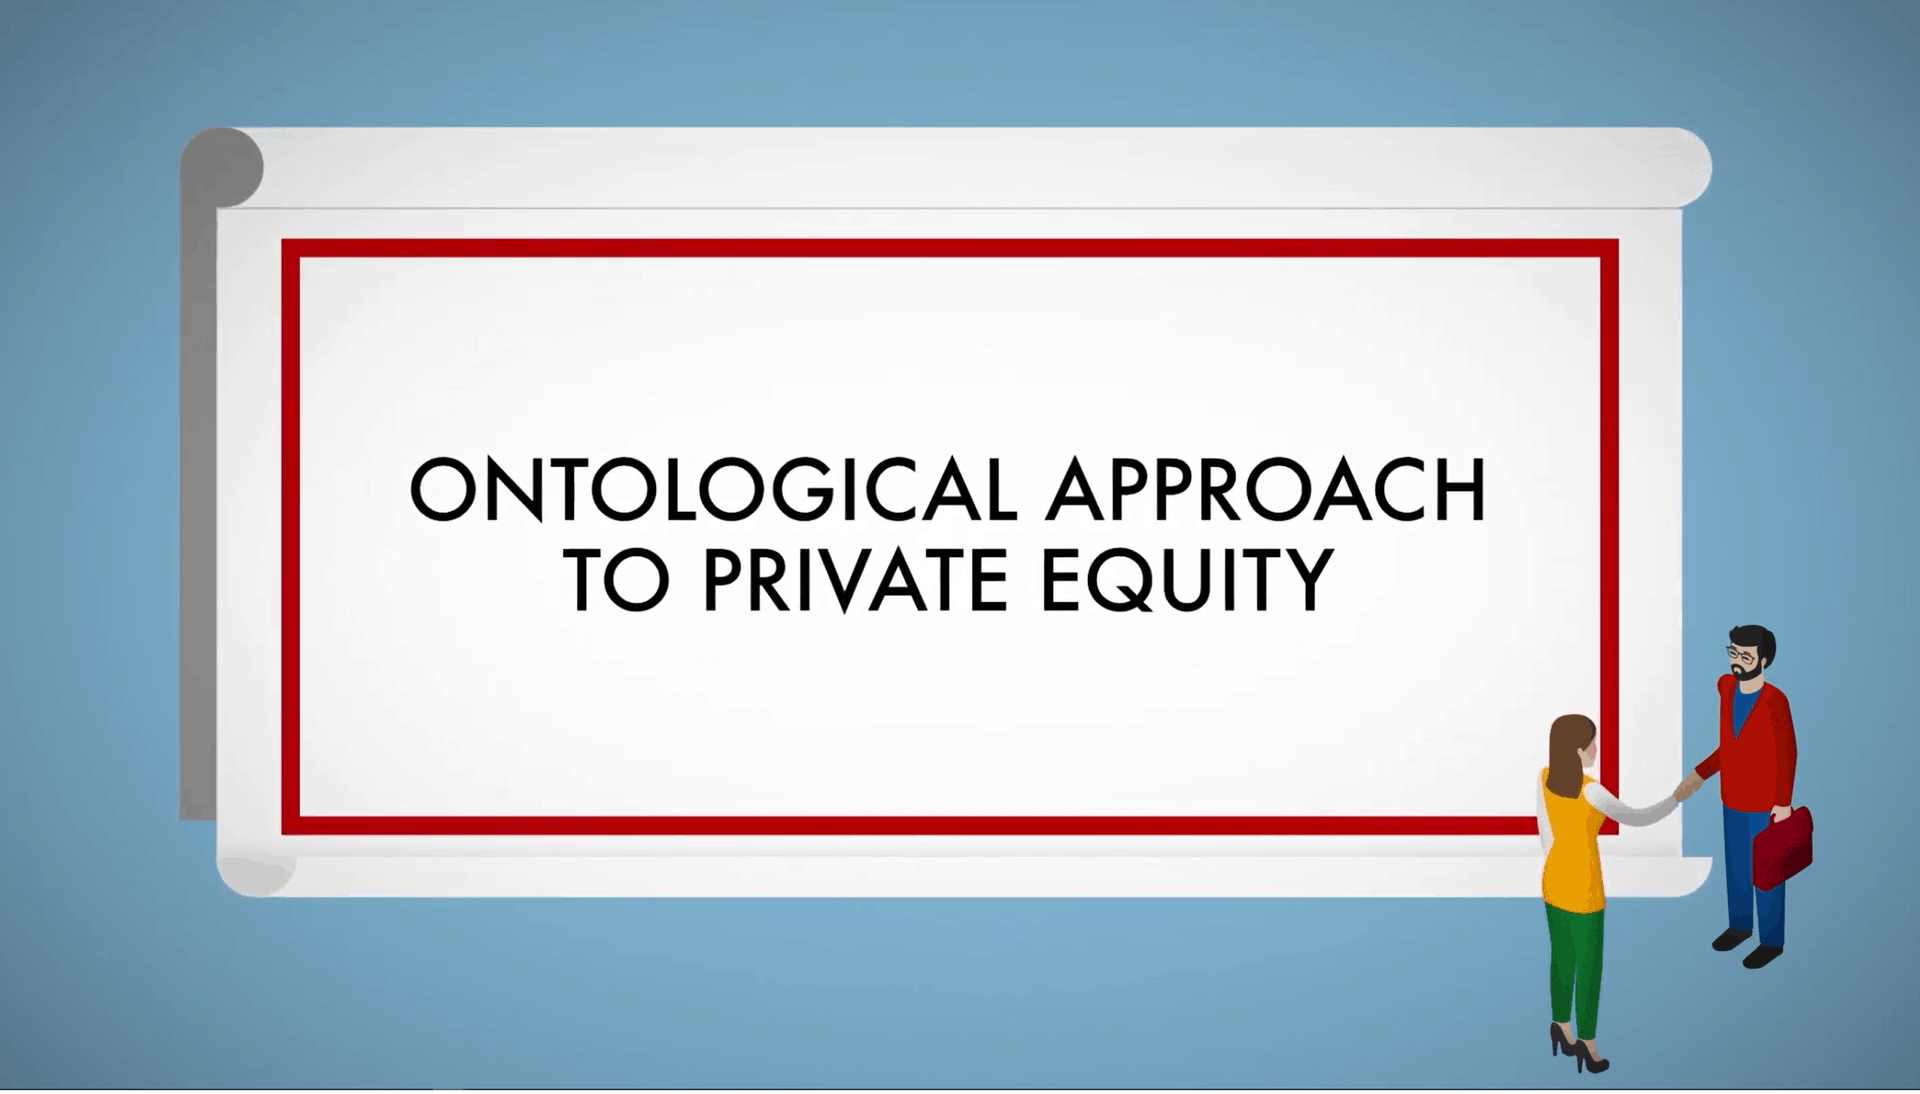 Mekong Capital's Ontological Approach to Private Equity